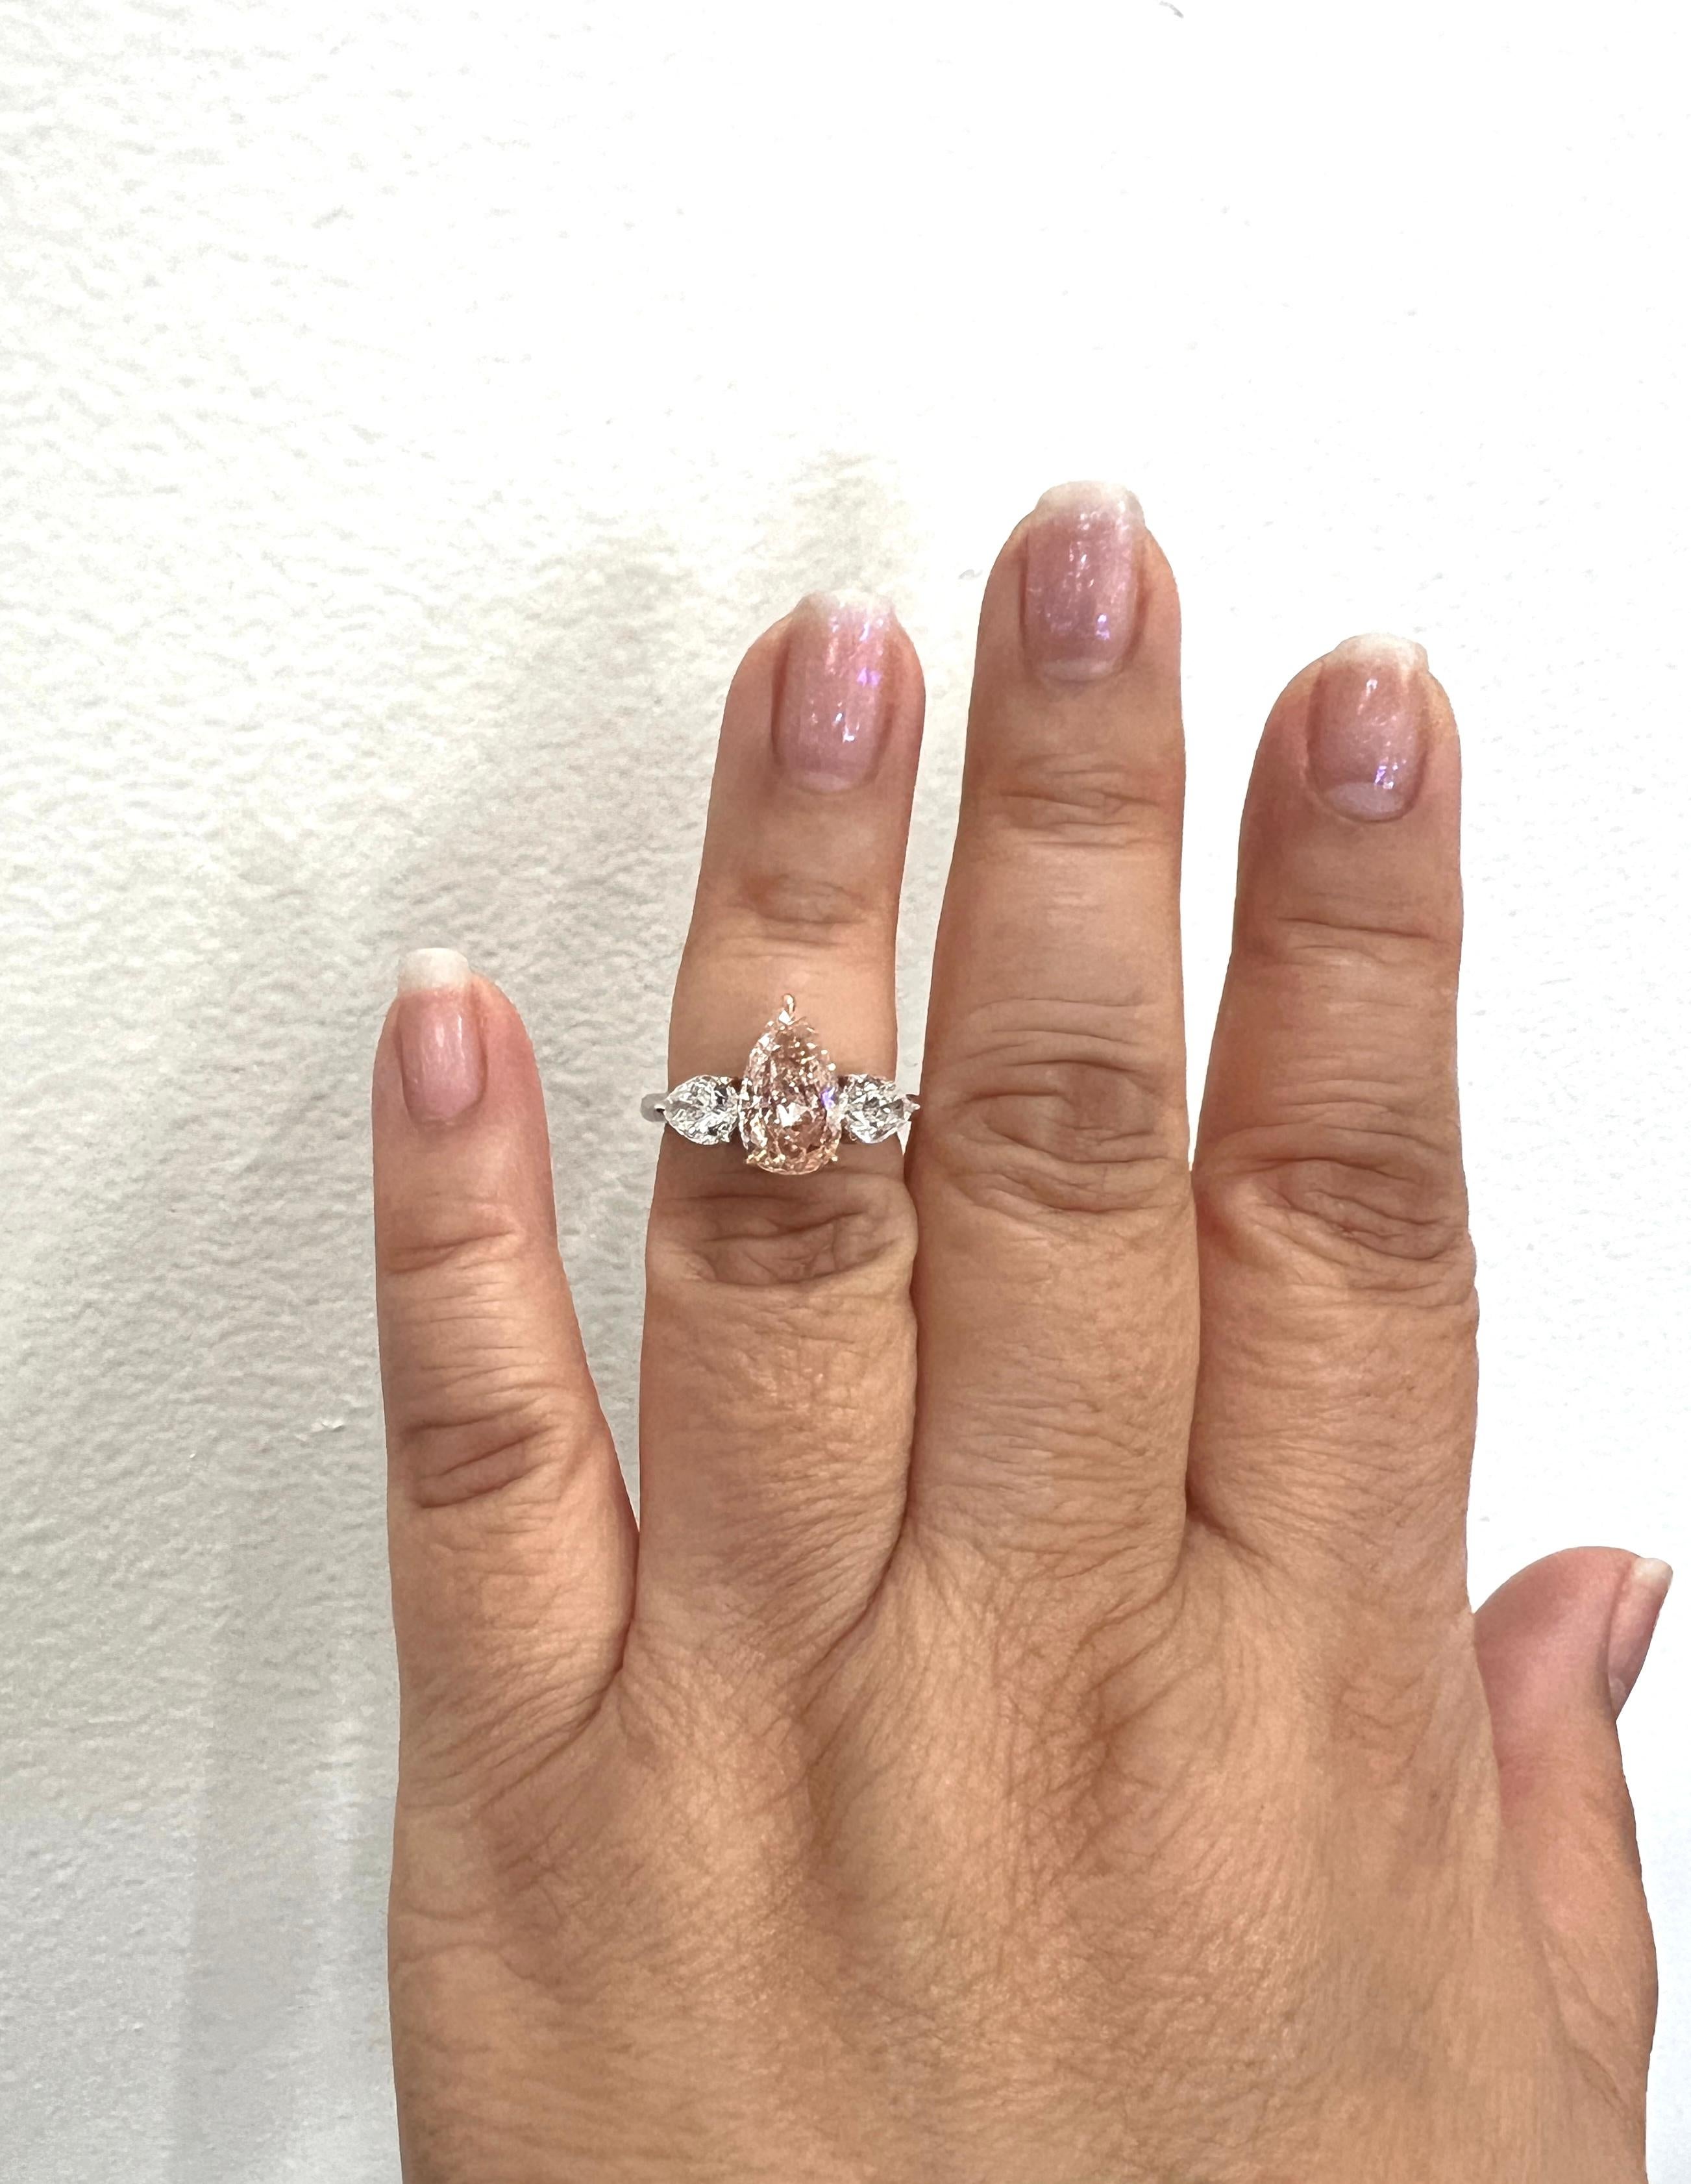 Absolutely breathtaking 2.78 ct. VS1 fancy orangy pink pear shape diamond with two 1.41 ct. F VS2 white diamond pear shapes.  Handmade in platinum and 18k rose gold.  Ring size 6.  This ring is stunning in real life!  GIA certificates included.